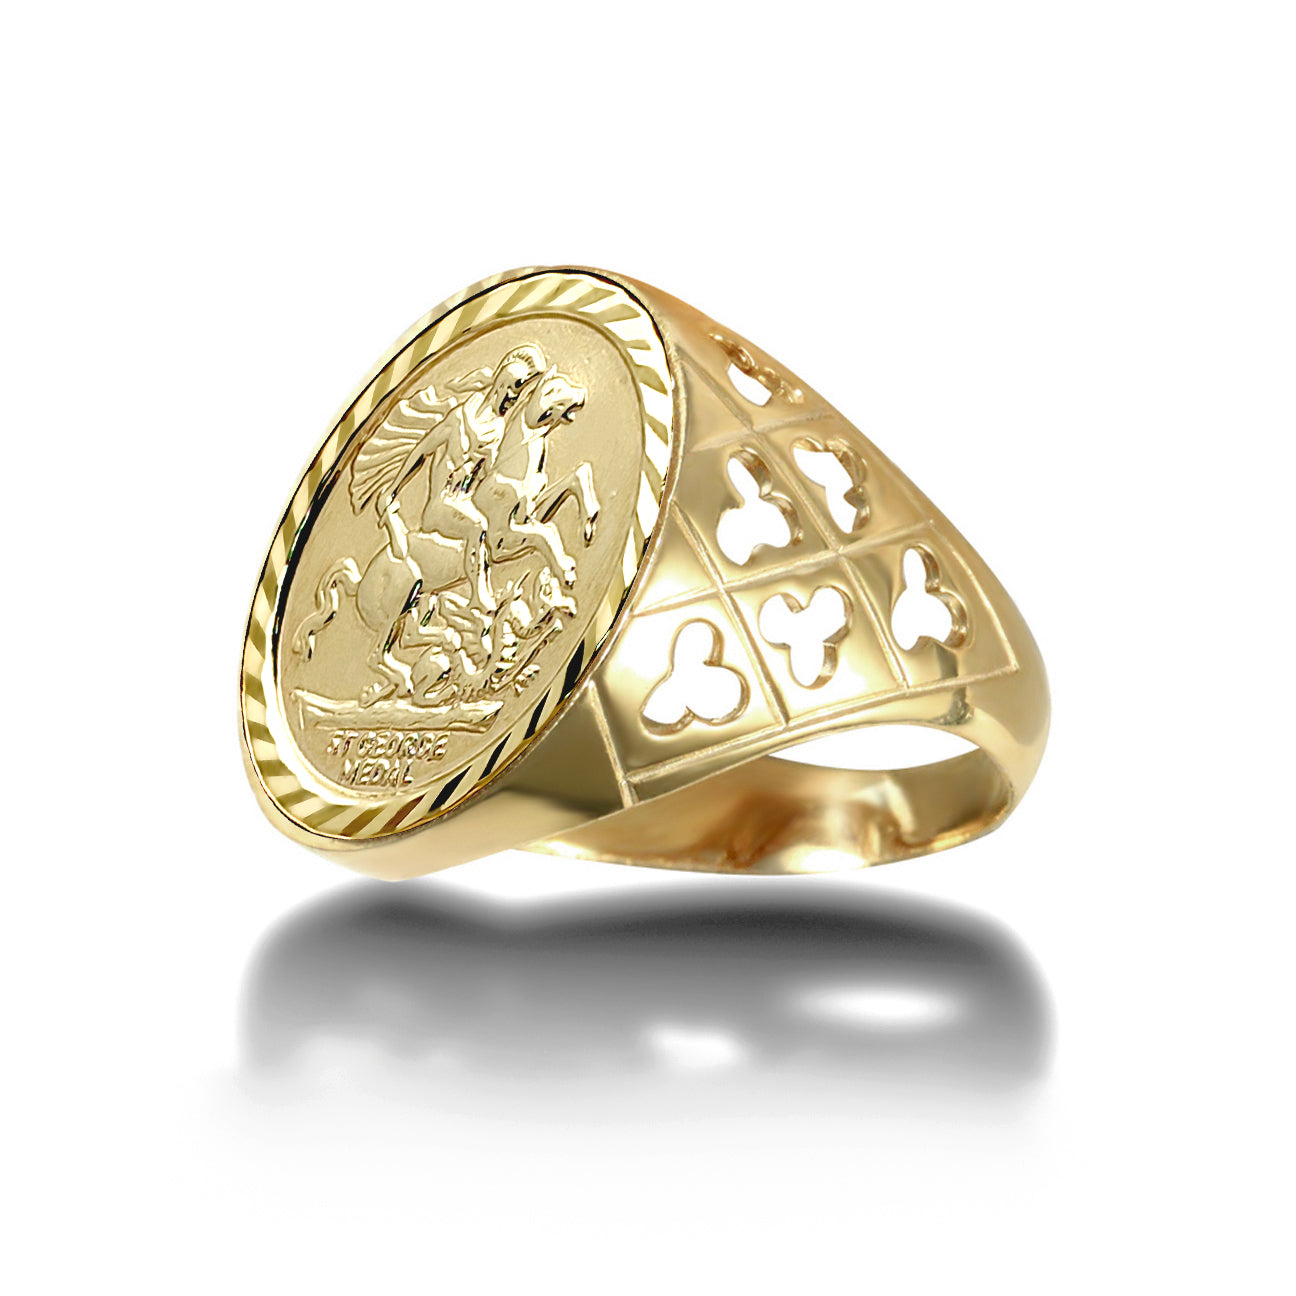 9ct Gold  Clubs Clovers St George Ring (Half Sov Size) - JRN177-H